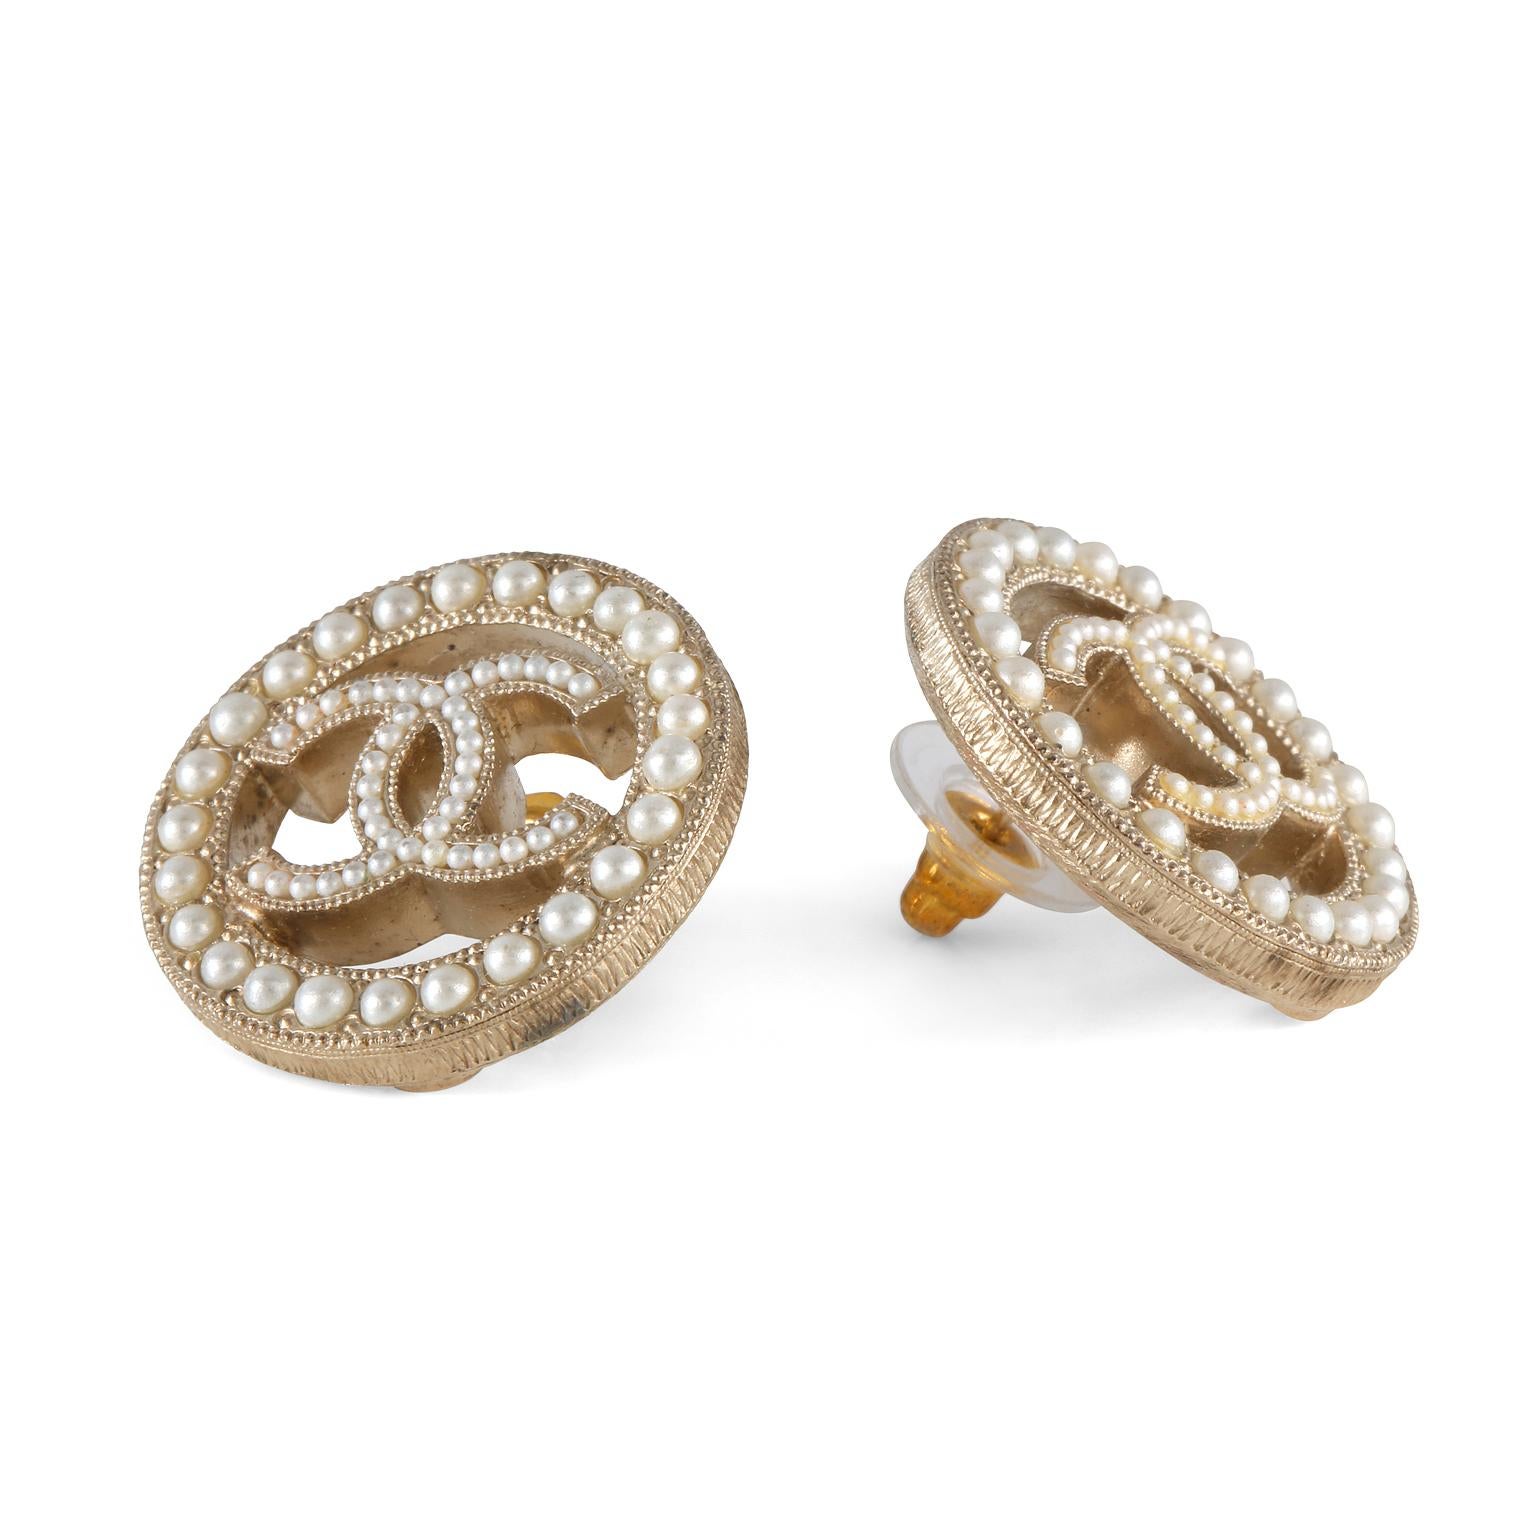 These authentic Chanel CC Pearl Earrings are in very good condition.  Open circles with dainty pearl surround and interlocking CC center.  Gold tone metal with post style closure.  Pouch or box included.

